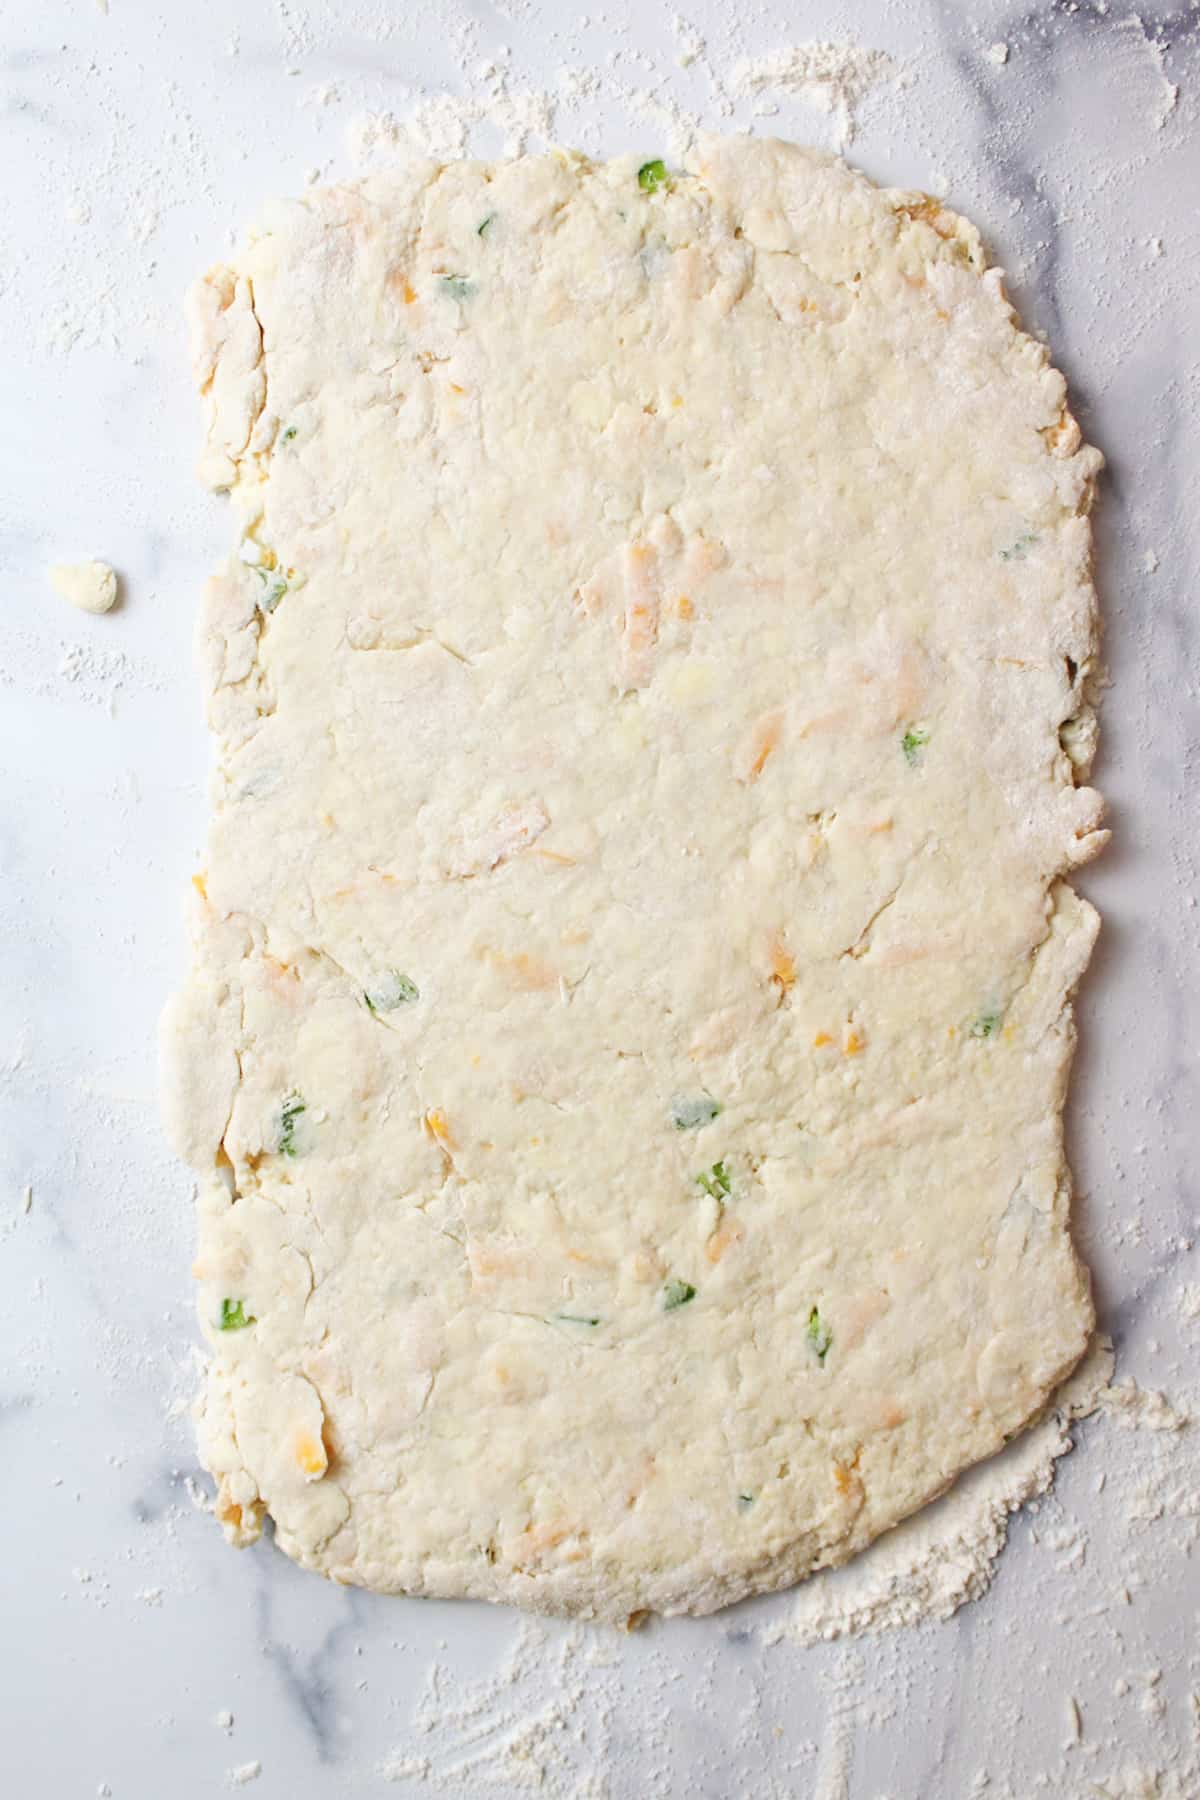 rolled rectangle of Jalapeno cheddar biscuit dough.